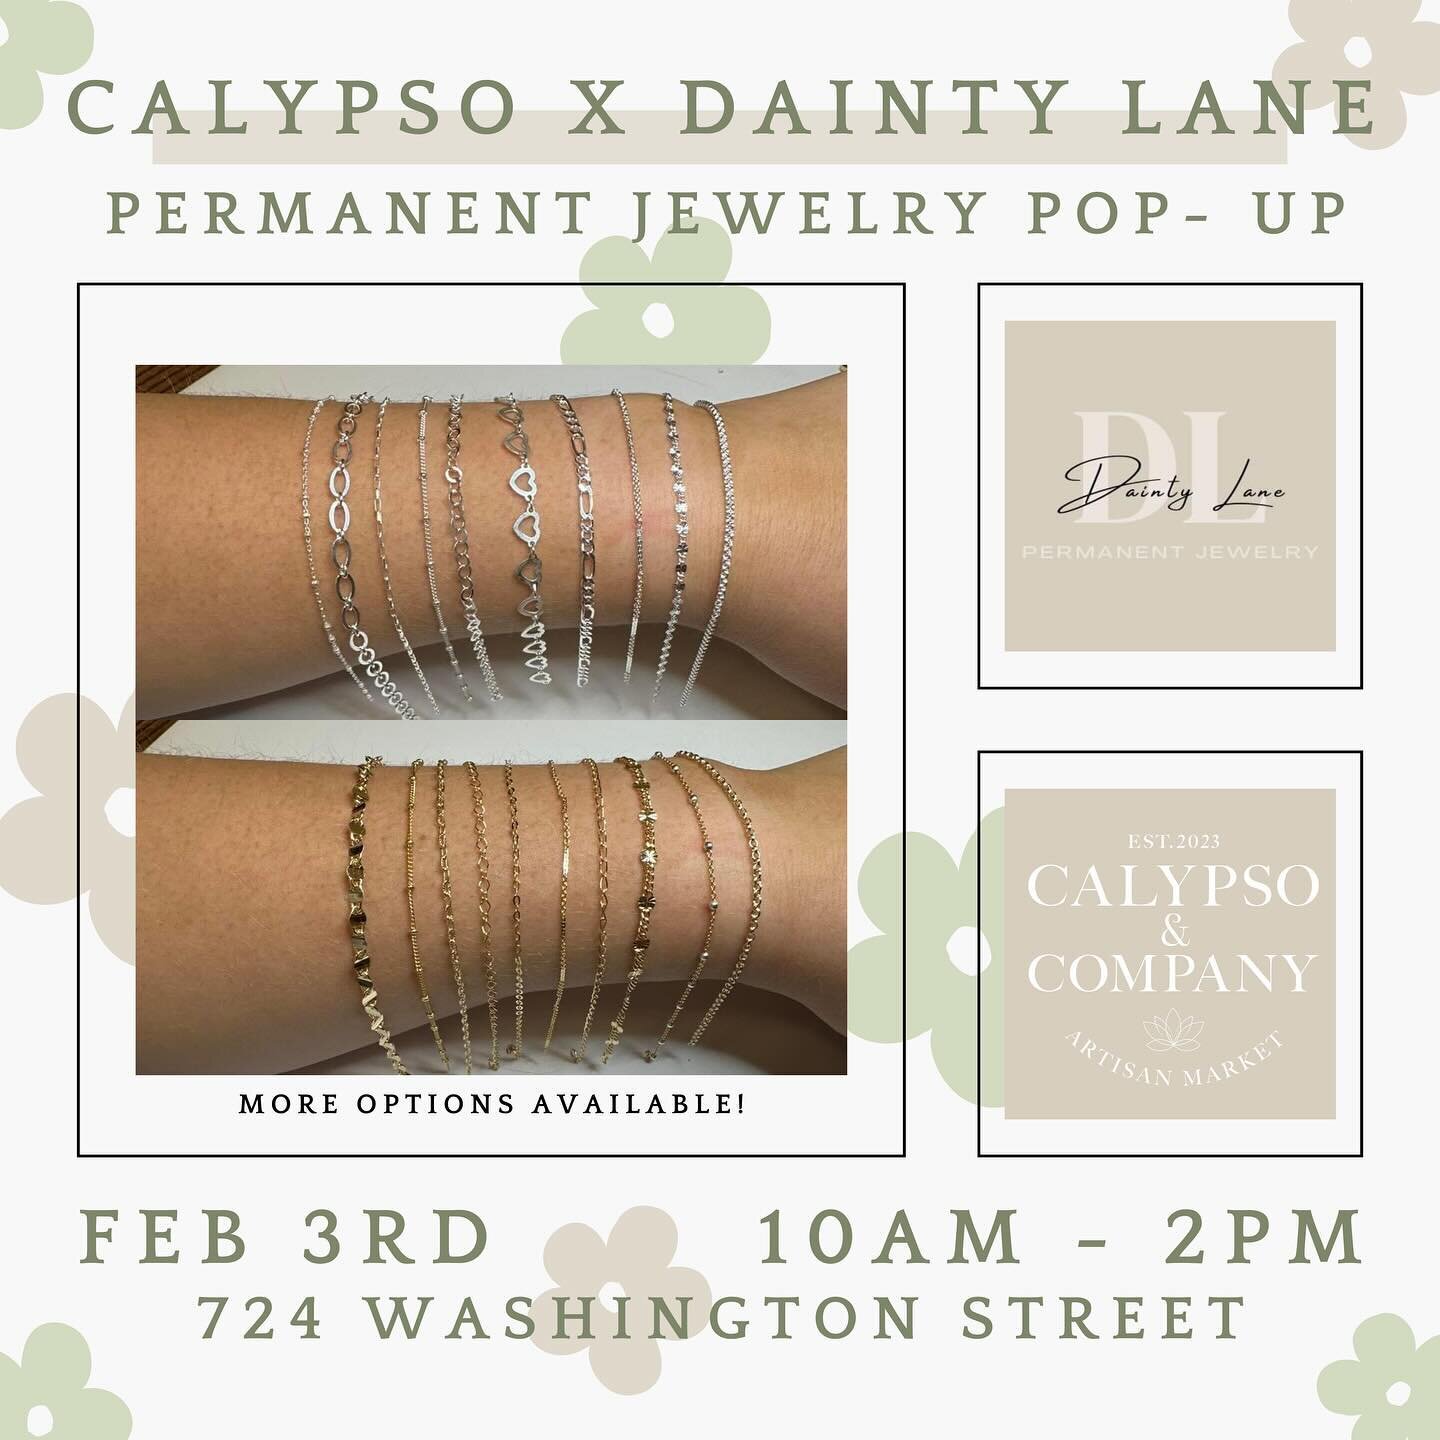 Dainty Lane Pop-Up 🛍️💎 Saturday, February 3rd!
-
With this BOGO 25% this is a perfect chance for a Mommy &amp; Me date! Or bring your bestie down and get matching sets! 🙌🏼

We&rsquo;ll see you there!!
Dainty Lane Permanent Jewelry &amp; Calypso ?